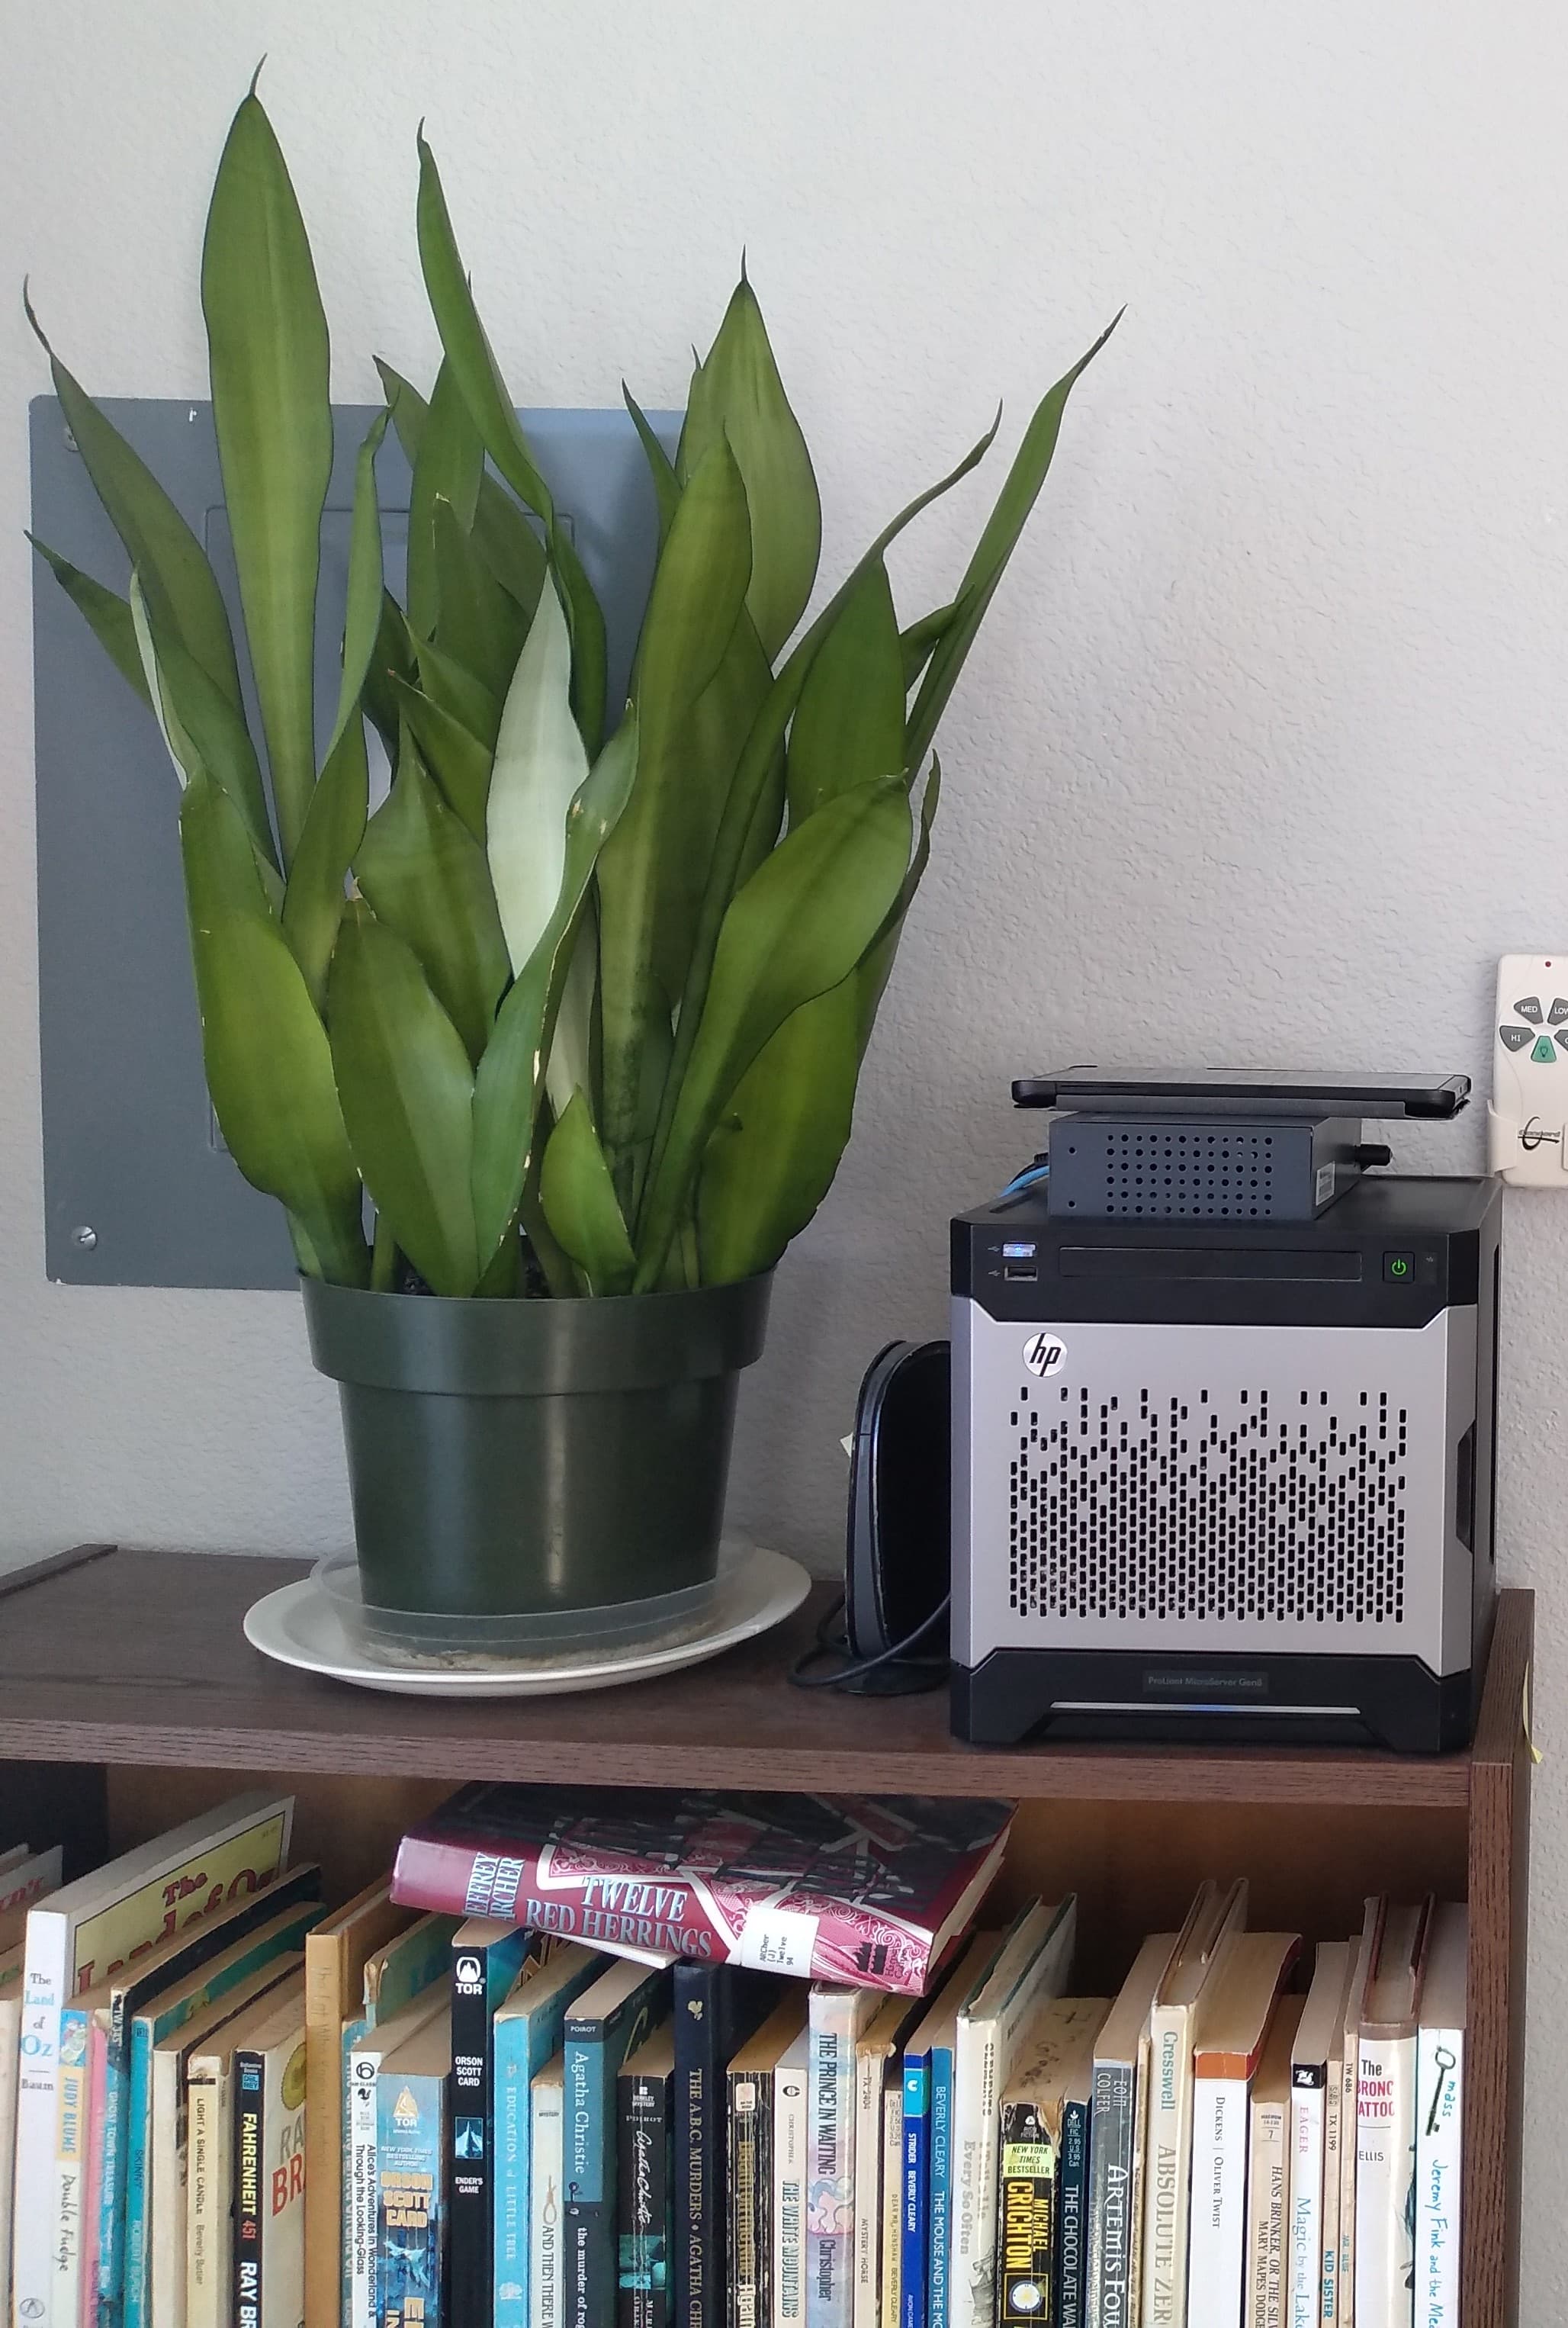 A silver cube (about 9 inches/22 centimeters on each side), with some cables attached, sits on top of a bookshelf of fiction, from "The Land of Oz - Baum" to "The Bronc Tattoo - Ellis". Next to it is a large plant with tall, stiff, slightly unkempt leaves in various shades of green.